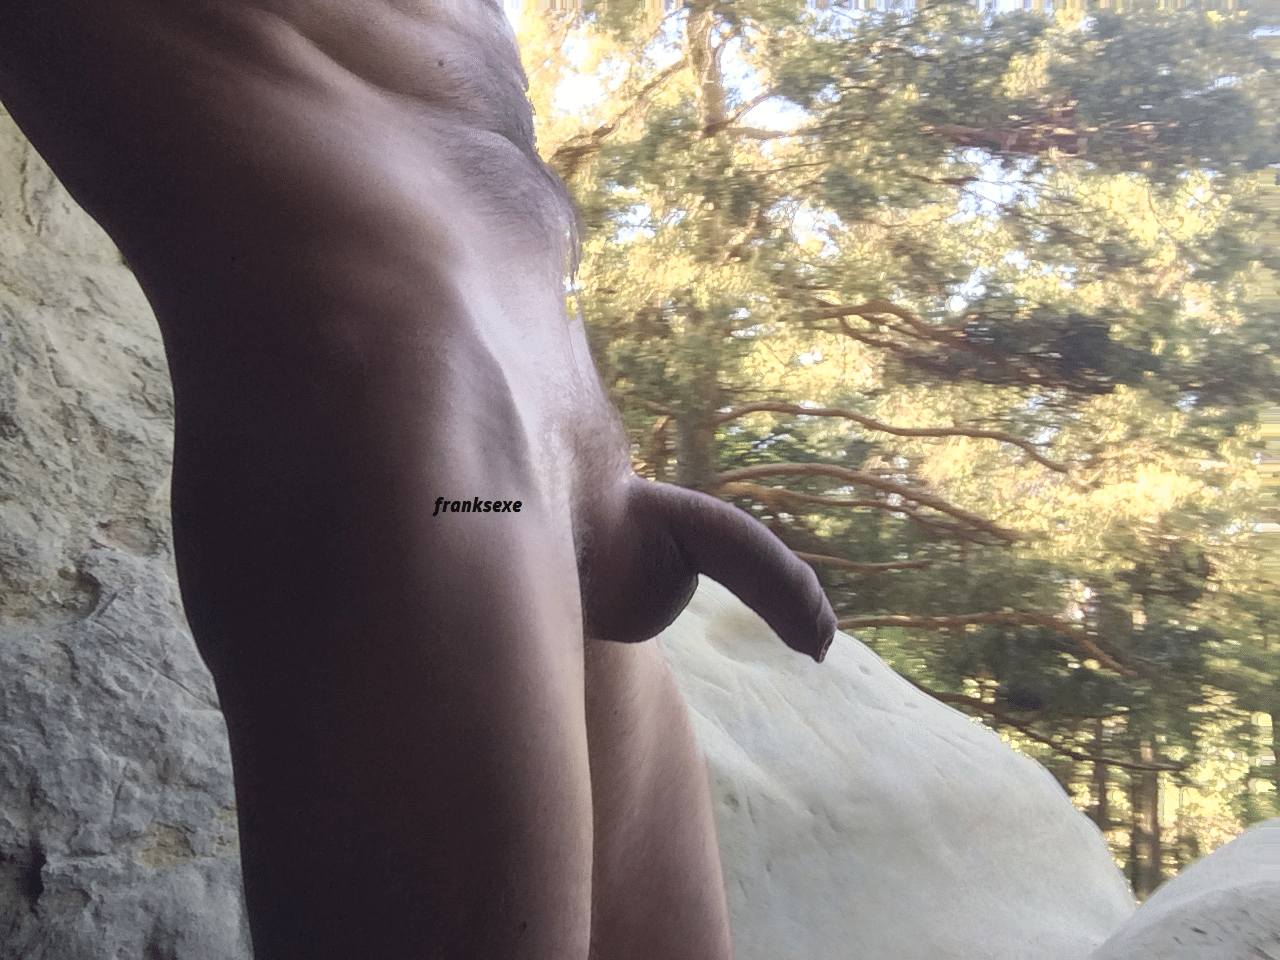 dick out in the woods real nudity dick flash